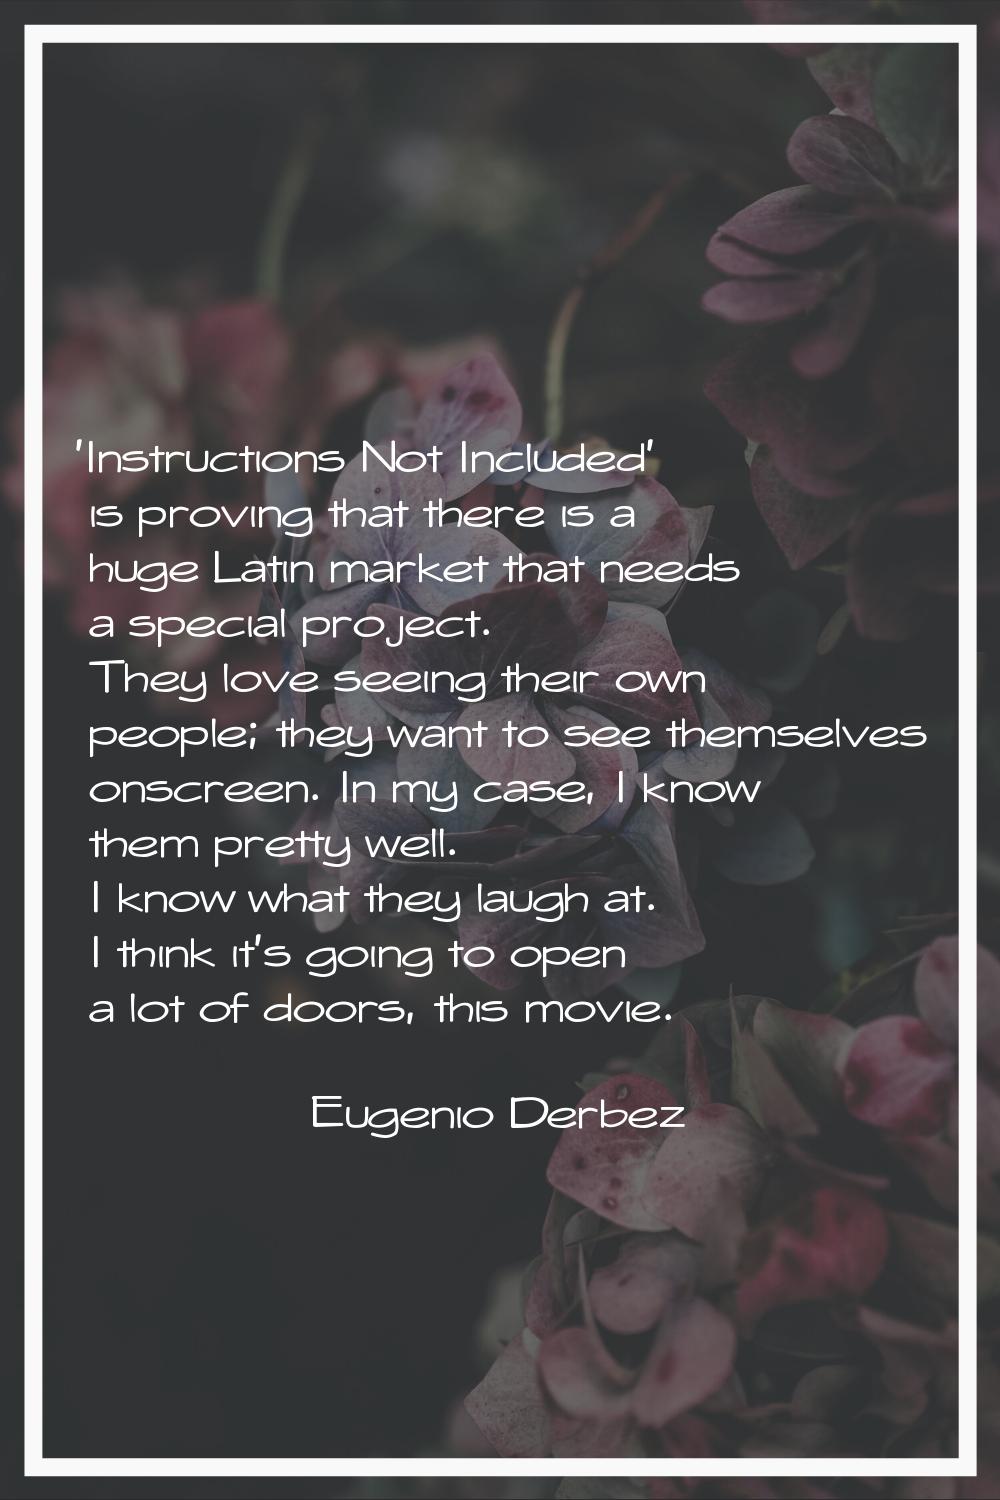 'Instructions Not Included' is proving that there is a huge Latin market that needs a special proje